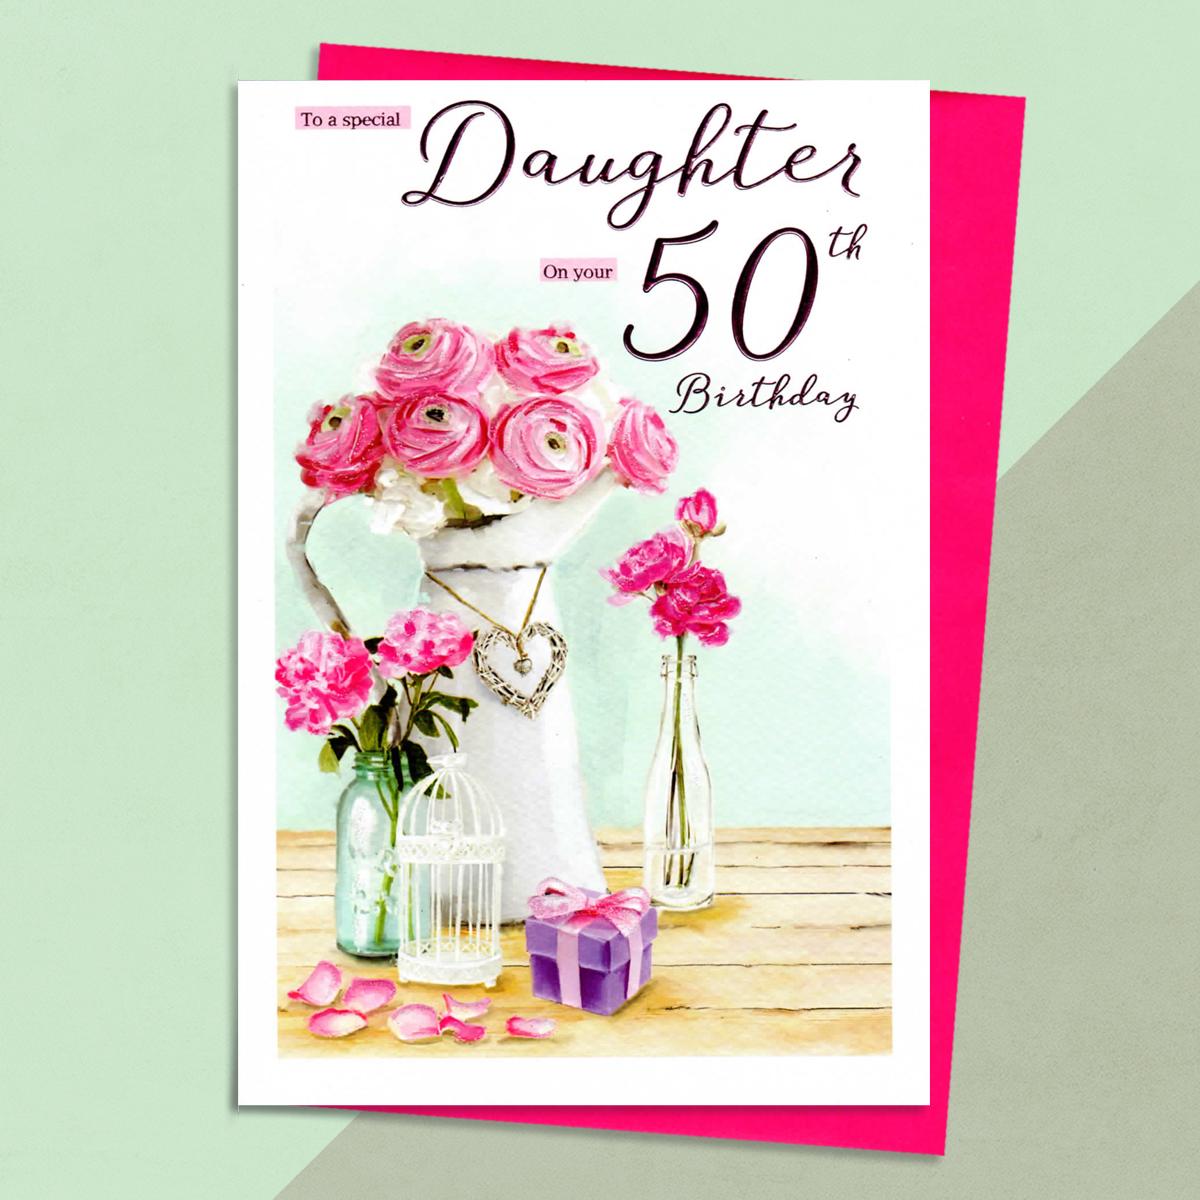 Daughter Age 50 Birthday Card Sitting On The Shelf